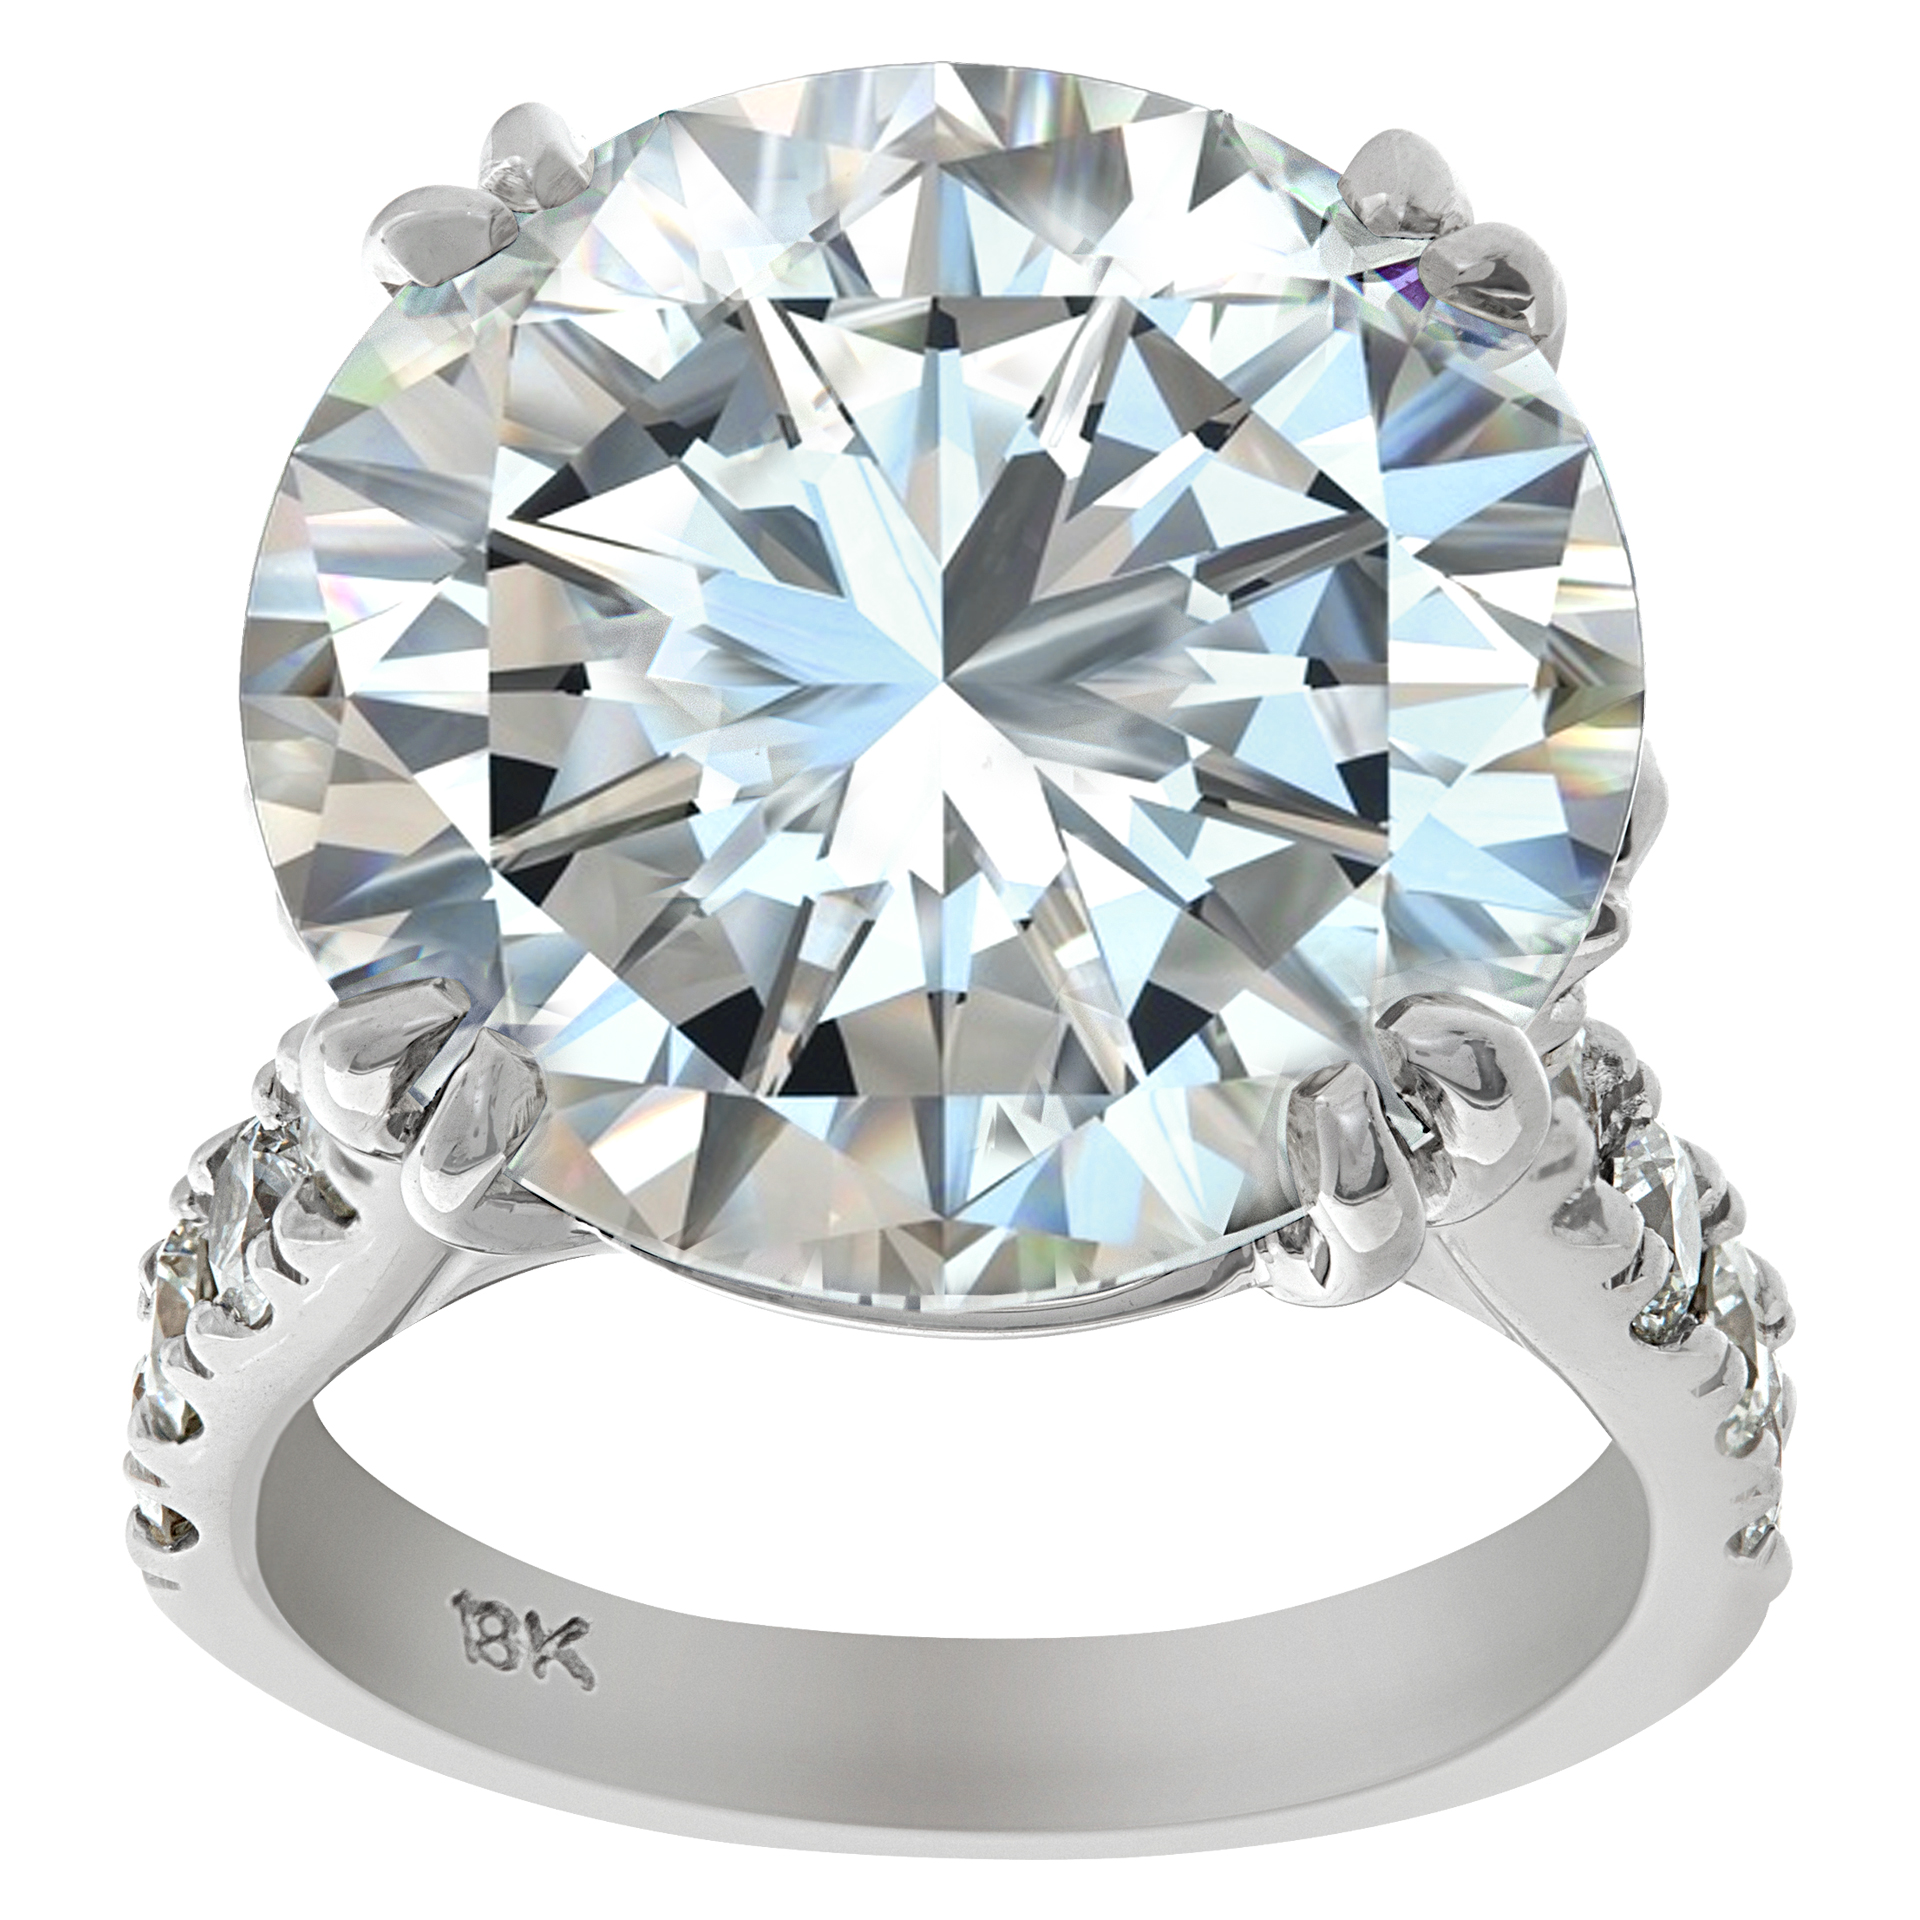 GIA Certified 16.92 carats round brilliant cut diamond set in 18K diamonds white gold ring. I color, image 1